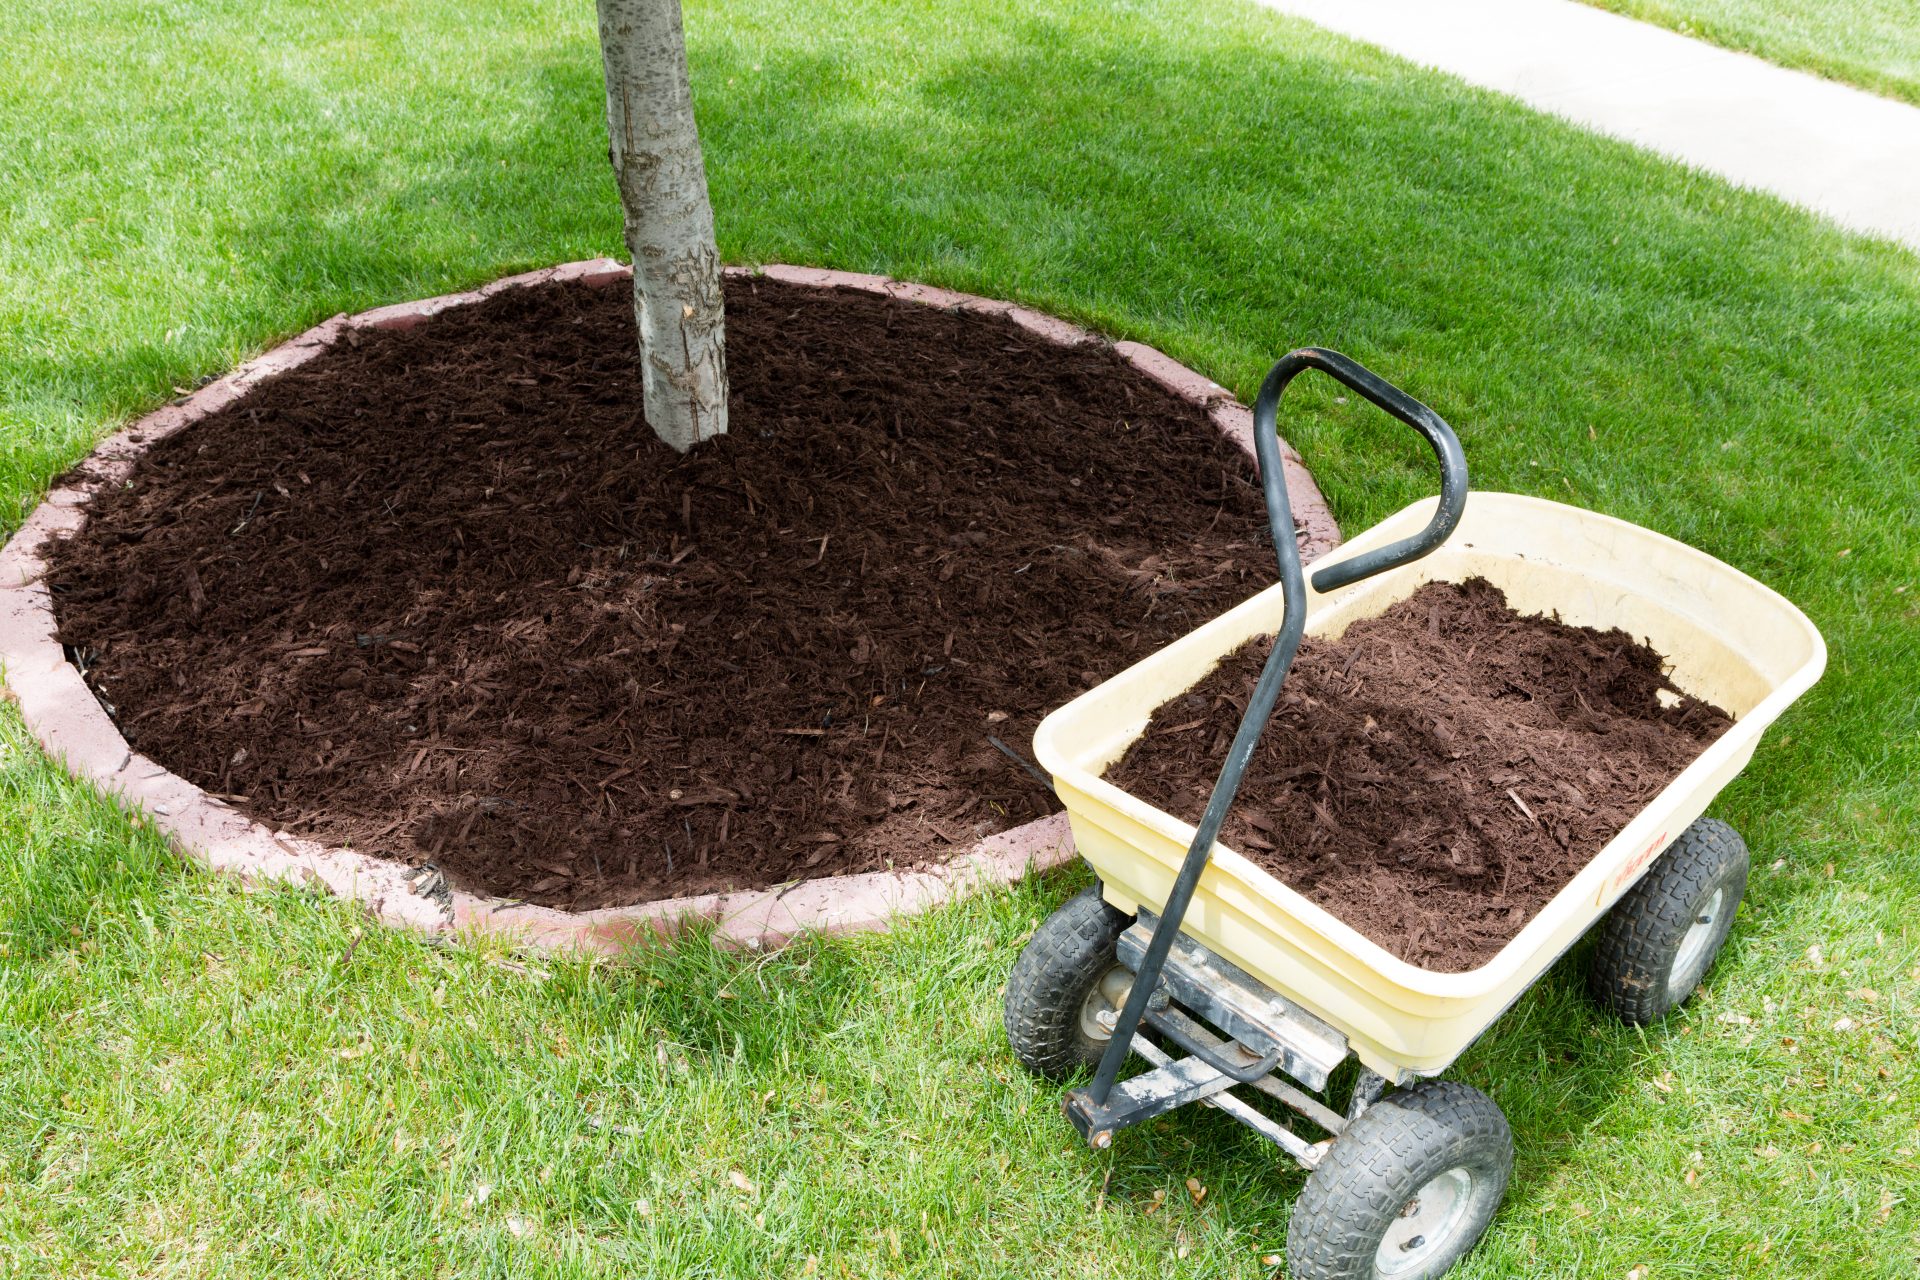 Mulch Delivering In Salt Lake City -What Is Mulch And How Can We Get IT?